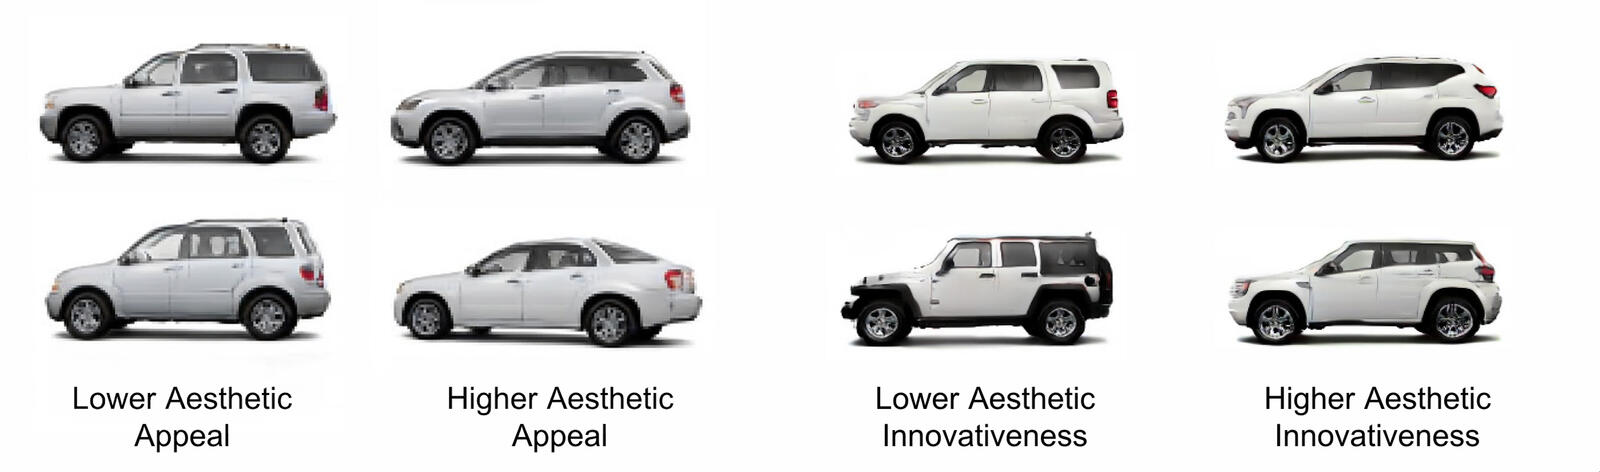 An array of vehicle designs with higher and lower appeal indicated.